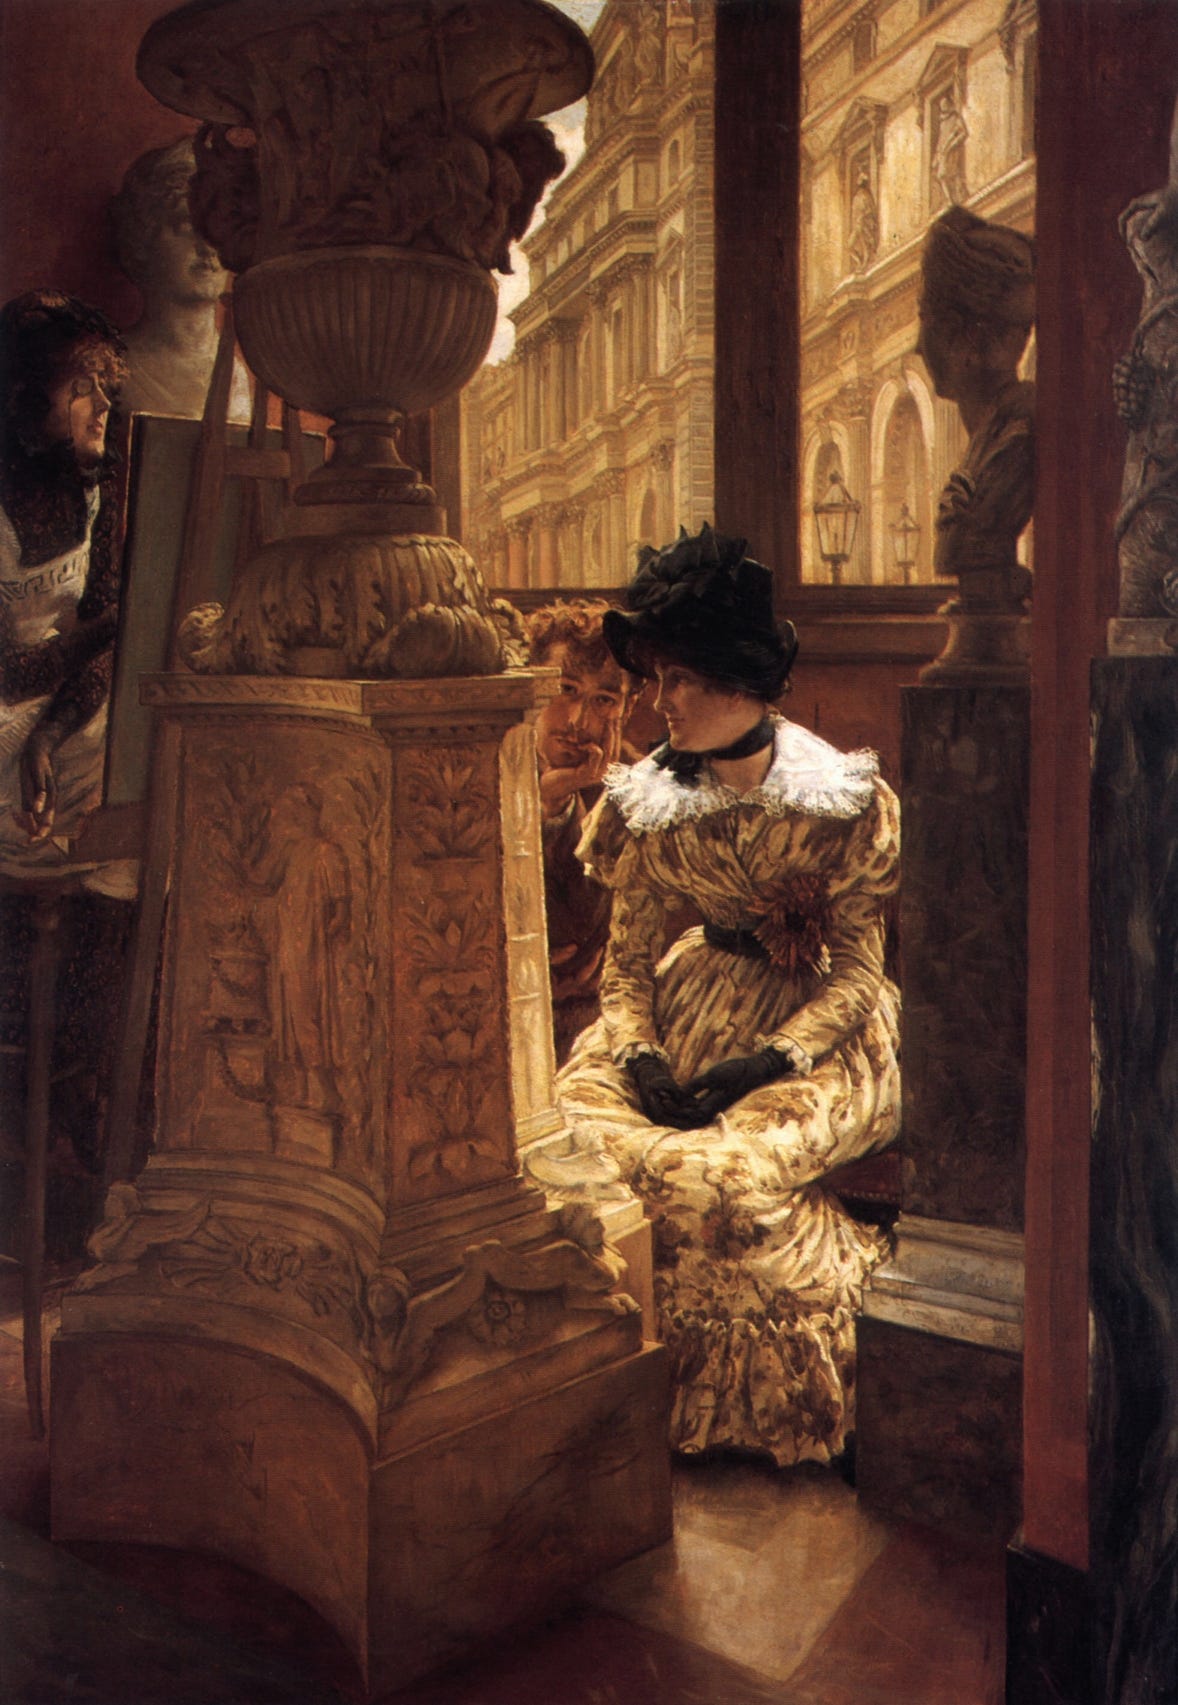 This artwork is a classic by James Tissot.